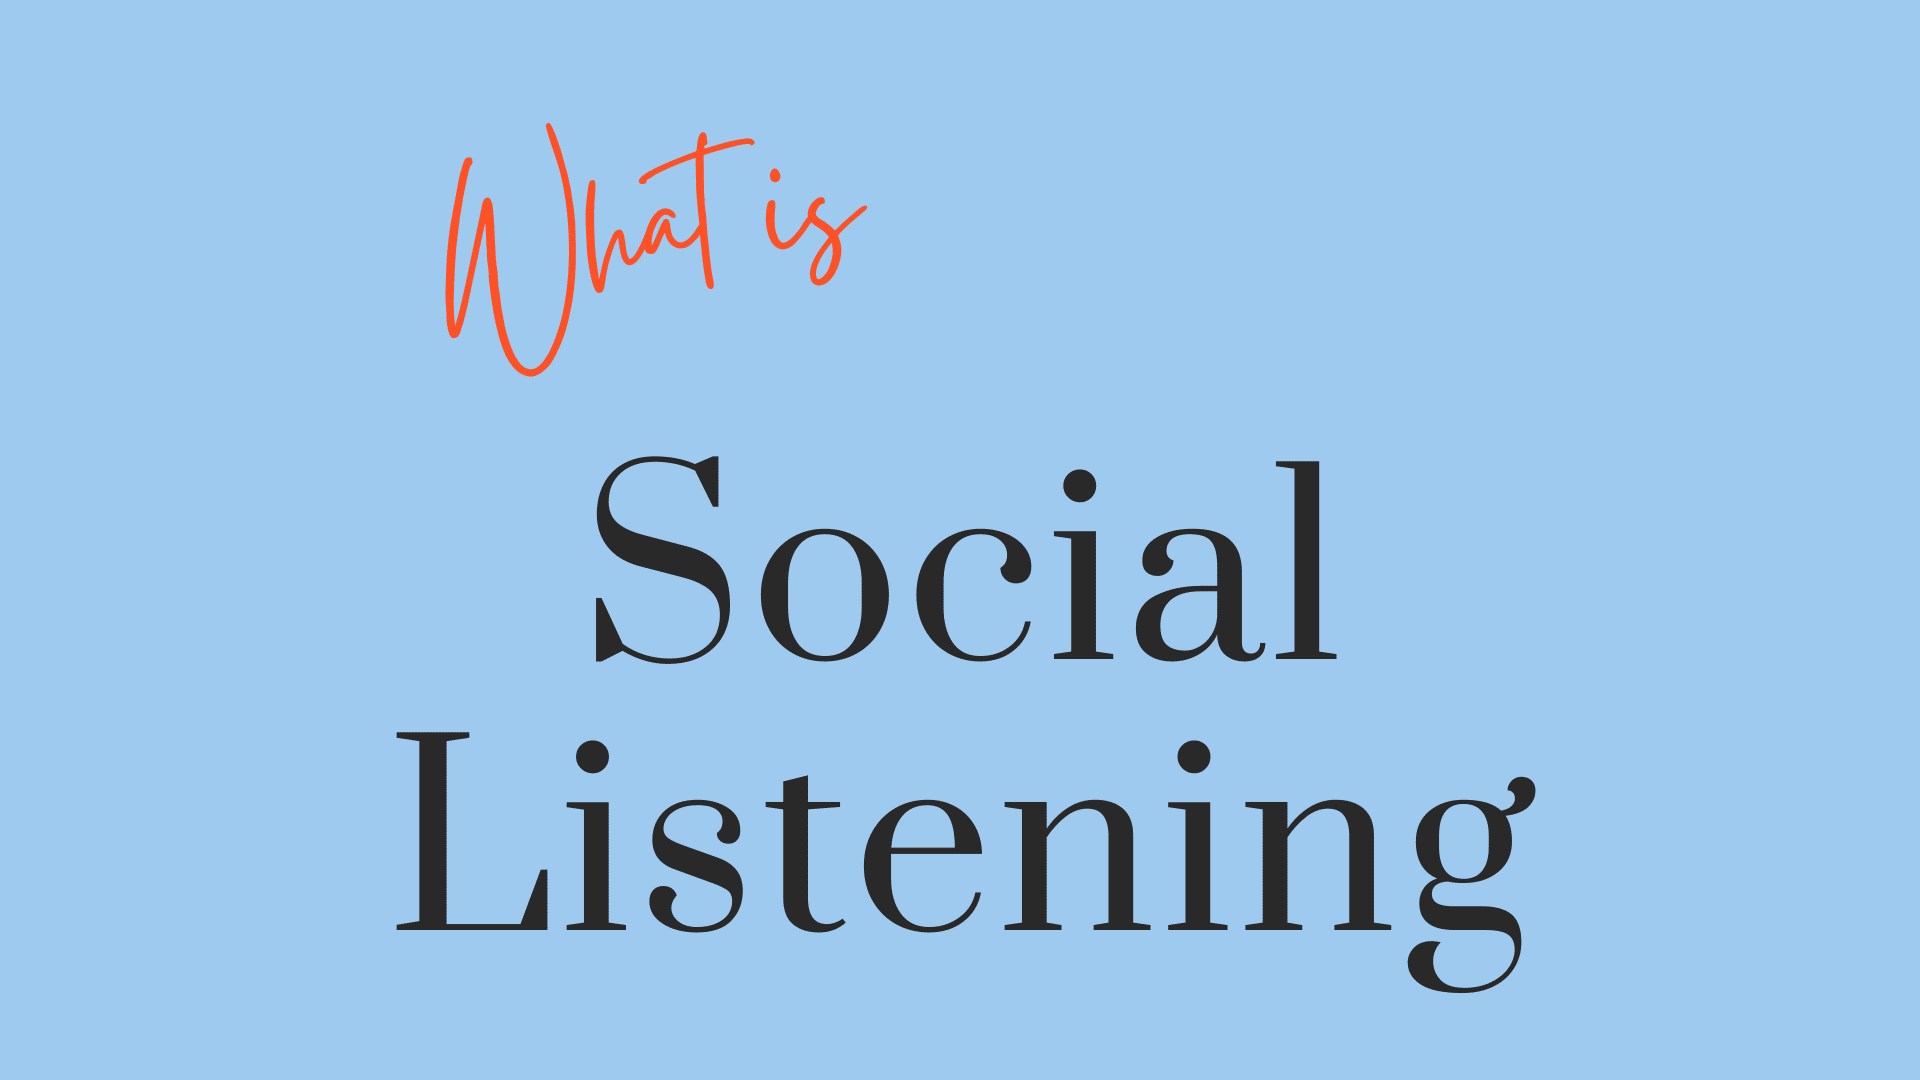 What is social listening